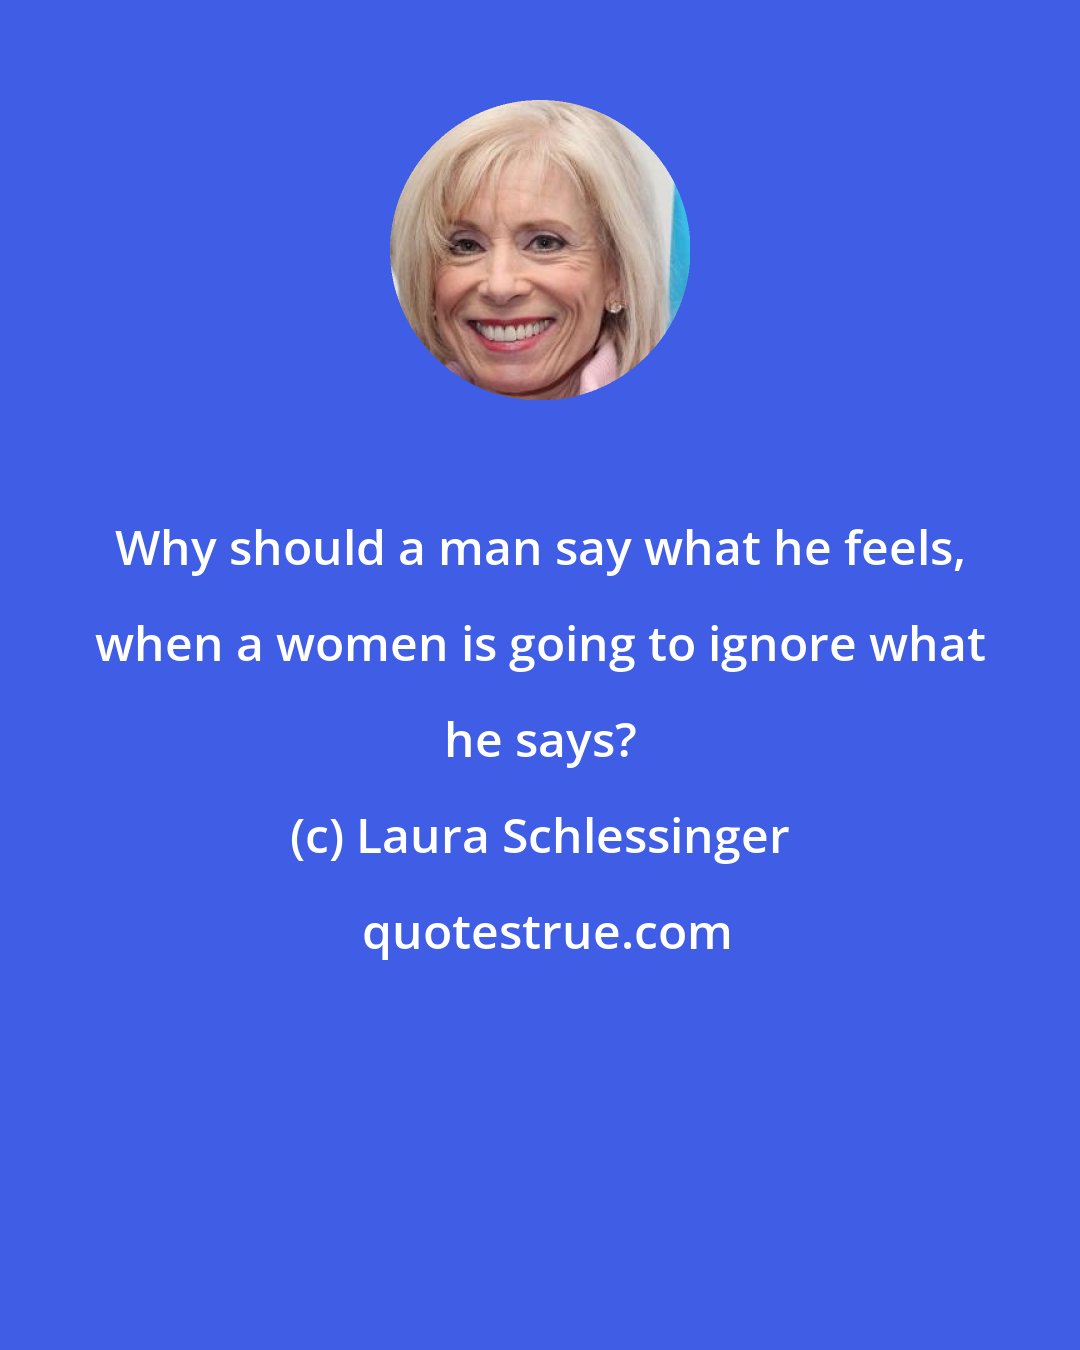 Laura Schlessinger: Why should a man say what he feels, when a women is going to ignore what he says?